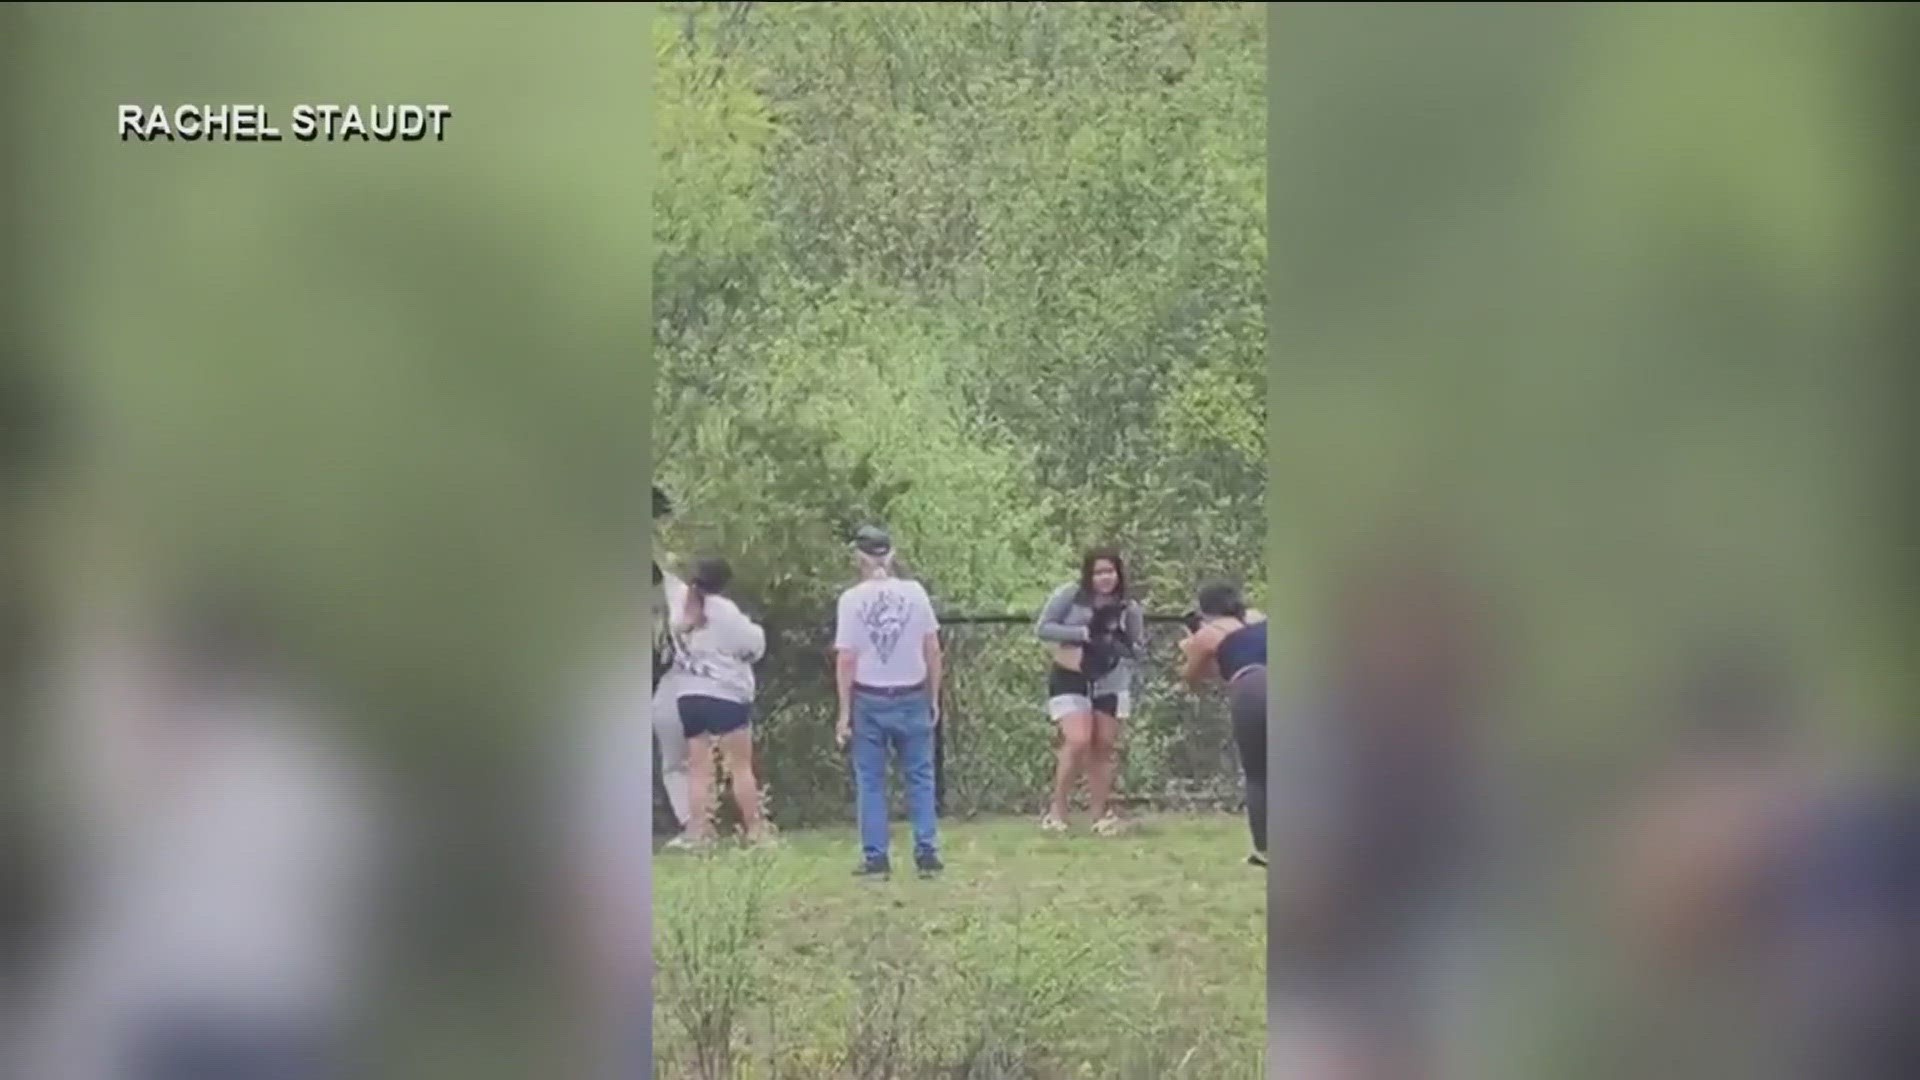 The group appeared to be harassing the bear cubs so they could take selfies with them.